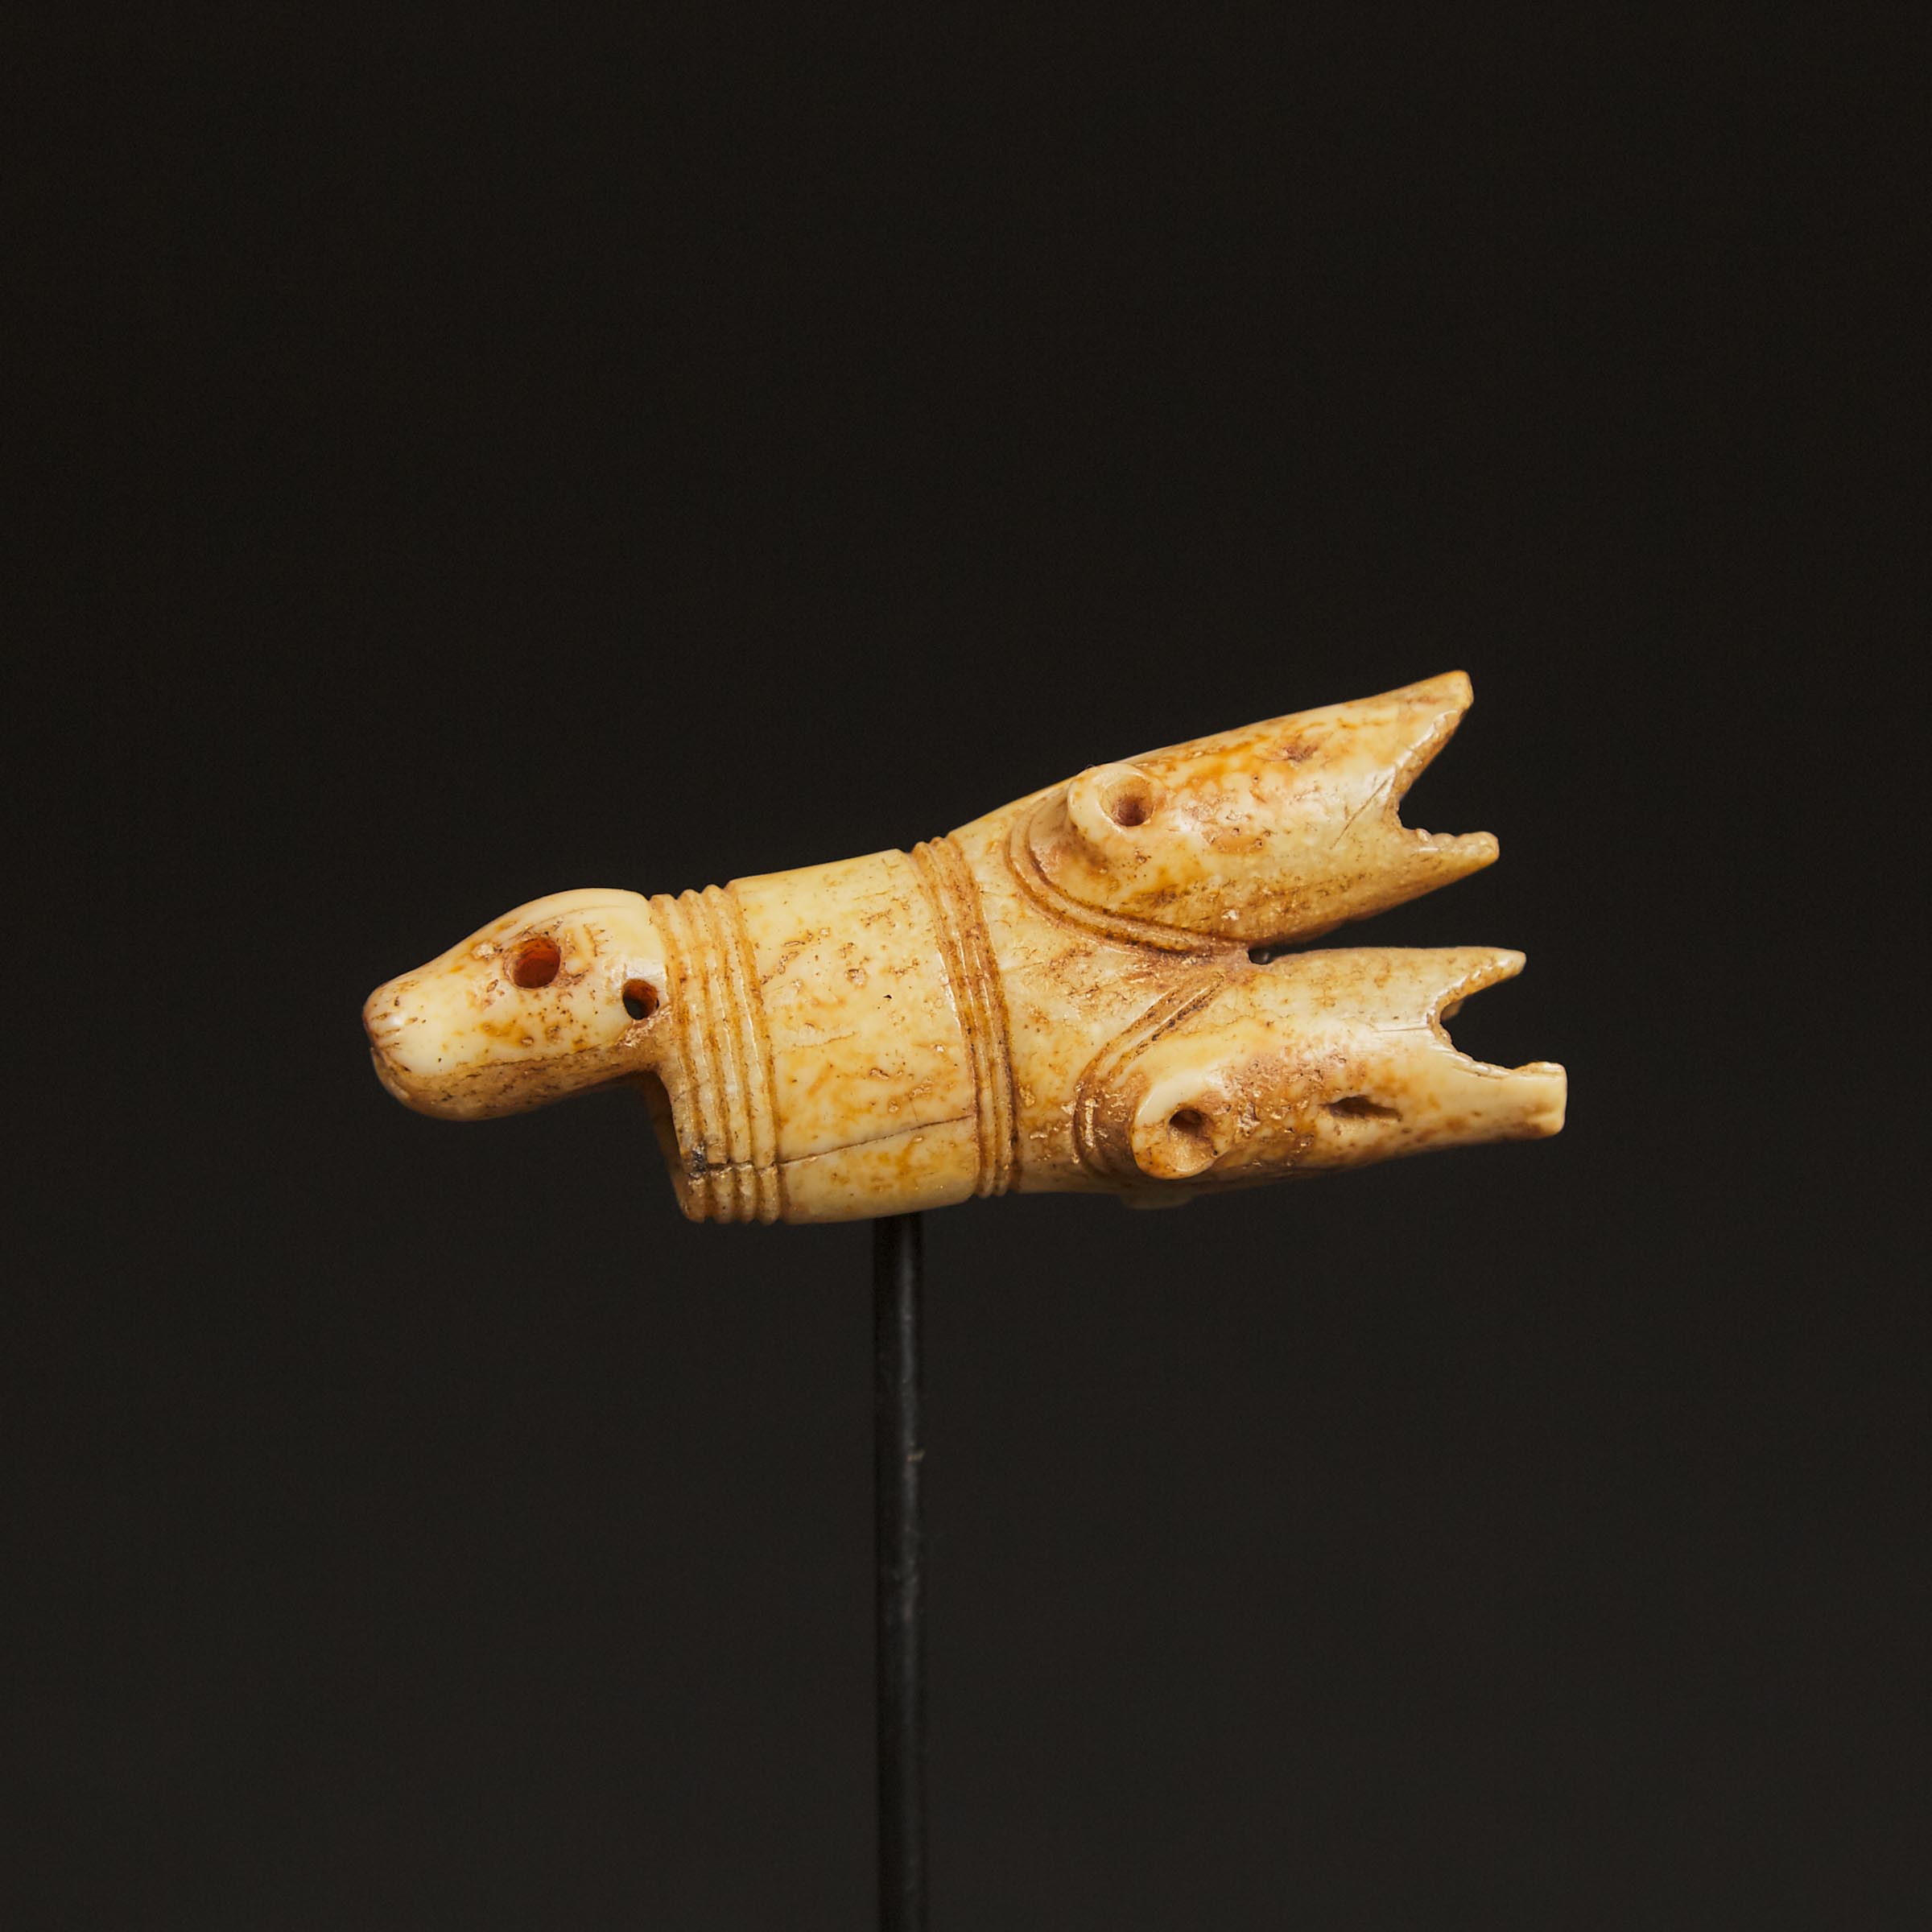 Bear and Seal Form Drag Handle, Thule, Gambell, Sivuqaq (St. Lawrence Island), ca. 1000-1800 CE